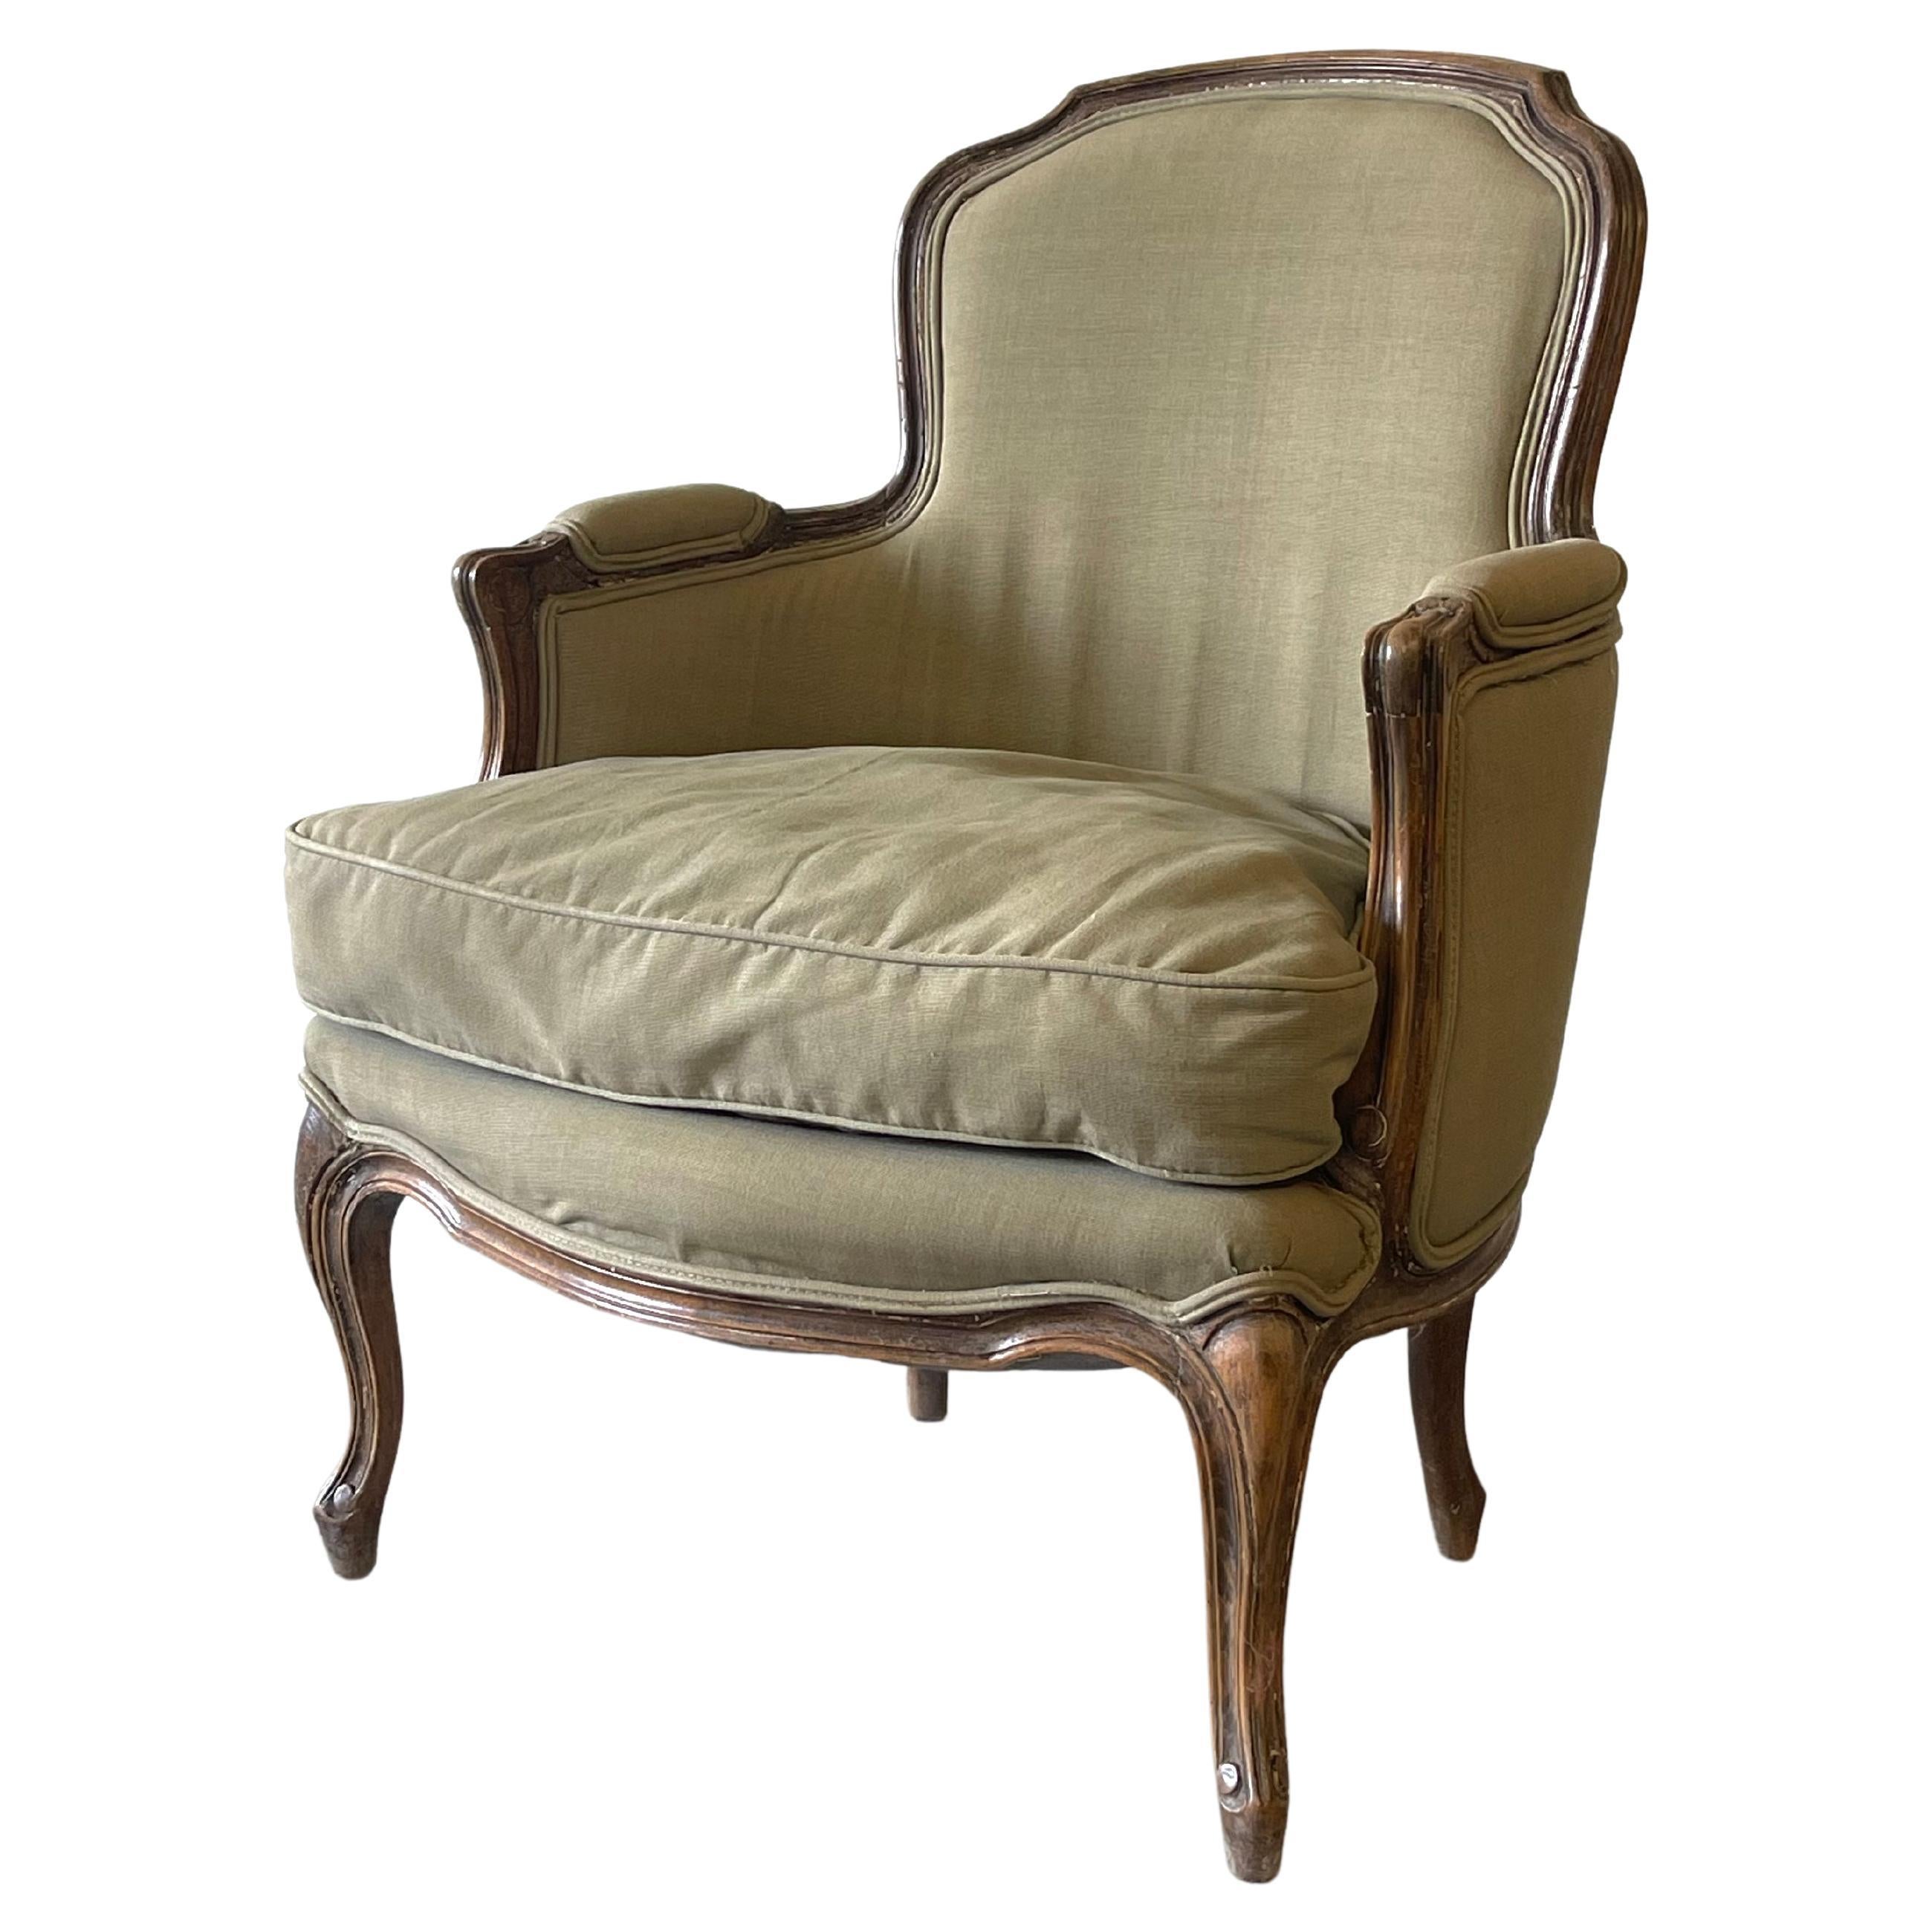 French Provincial Style Bergere Arm Chairs